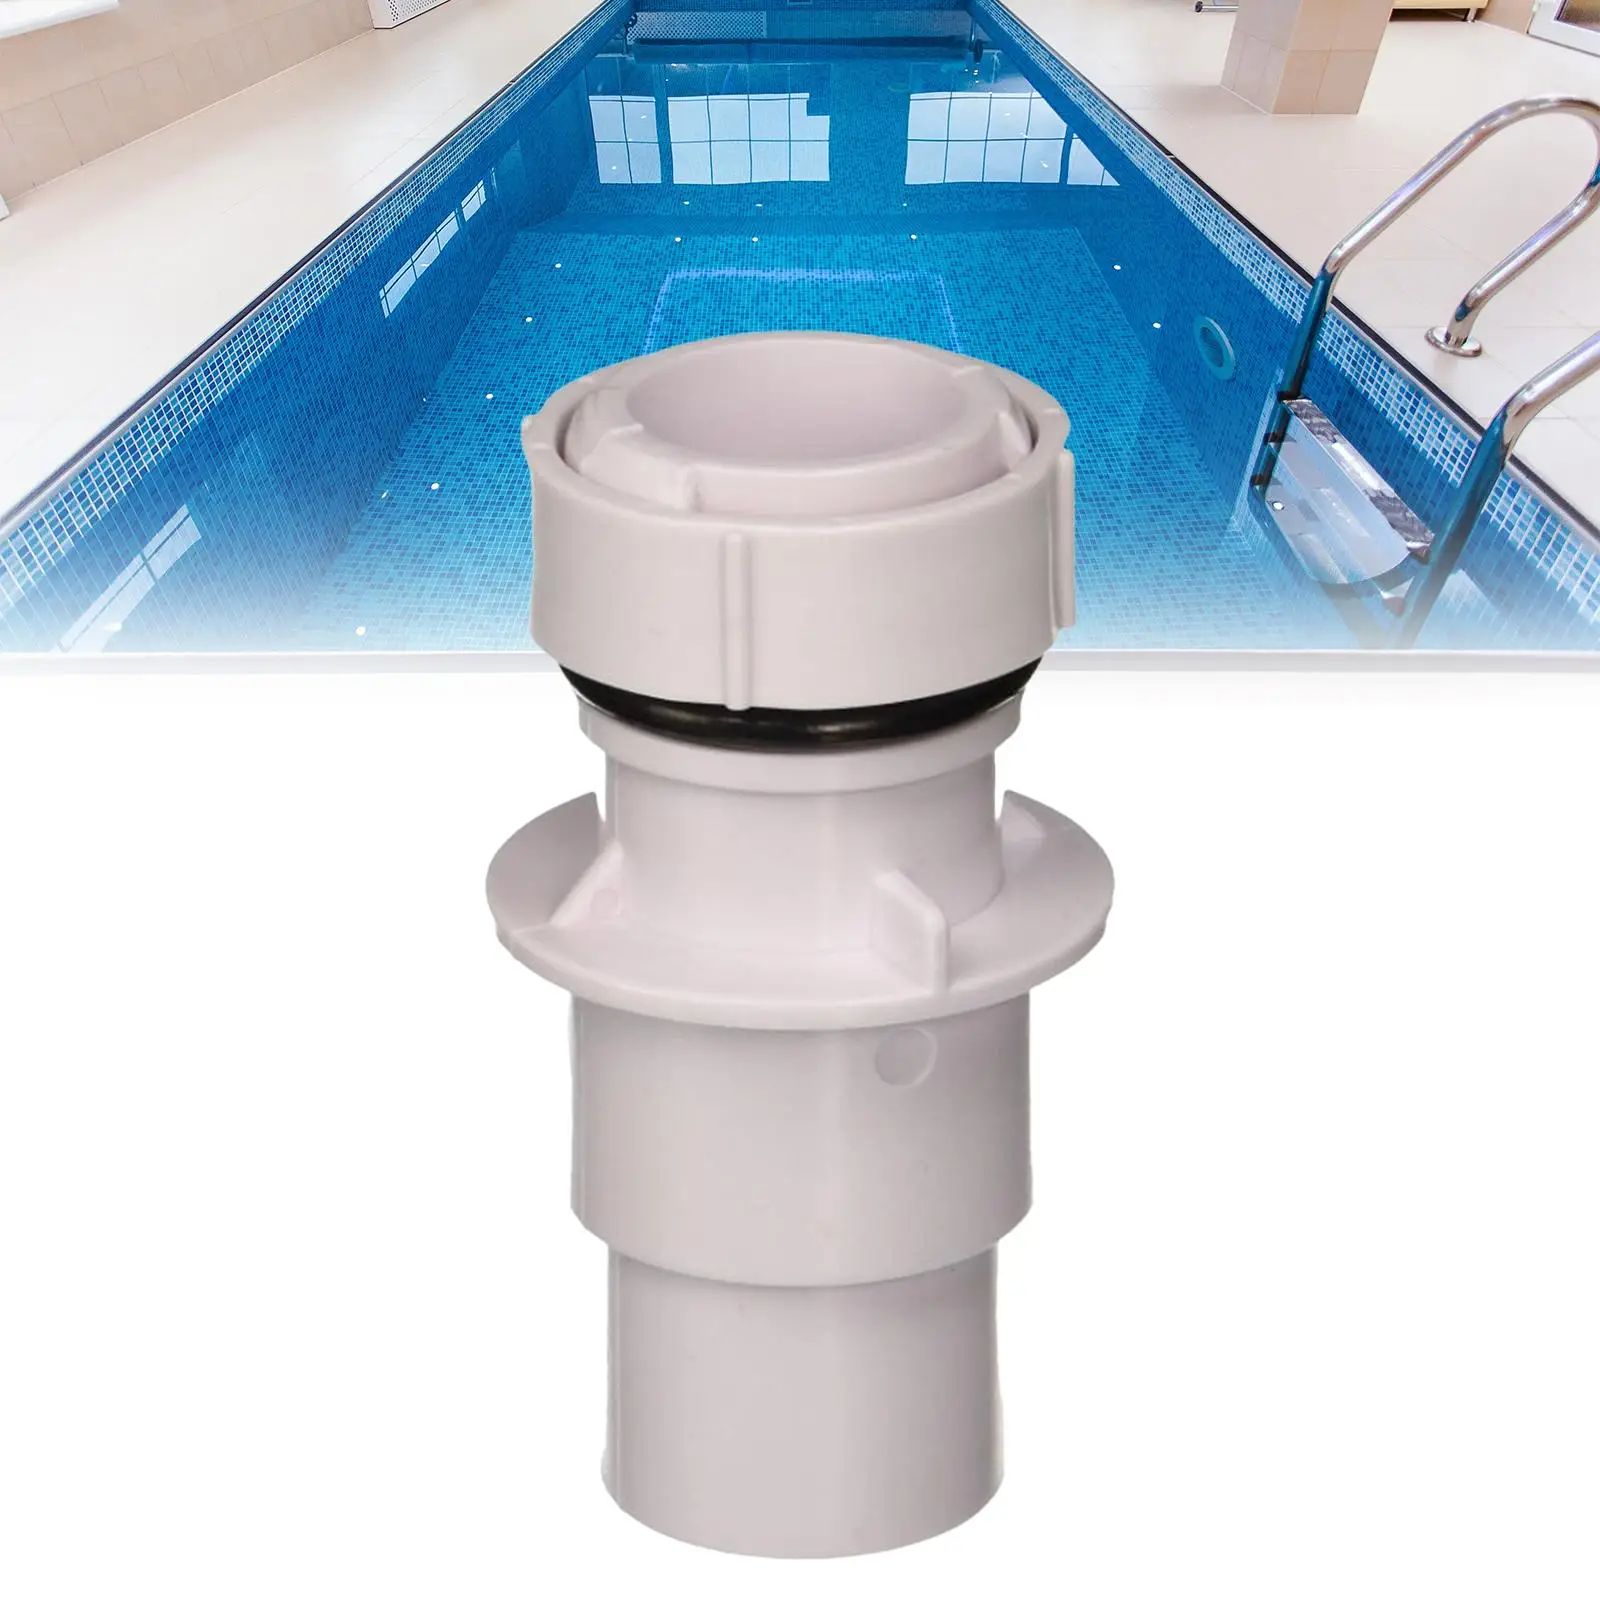 above Ground Pool Hose Coupling Connector Adapter Durable Pool Cleaning Fittings for Filter Skimmer Plumbing Connection Supplies